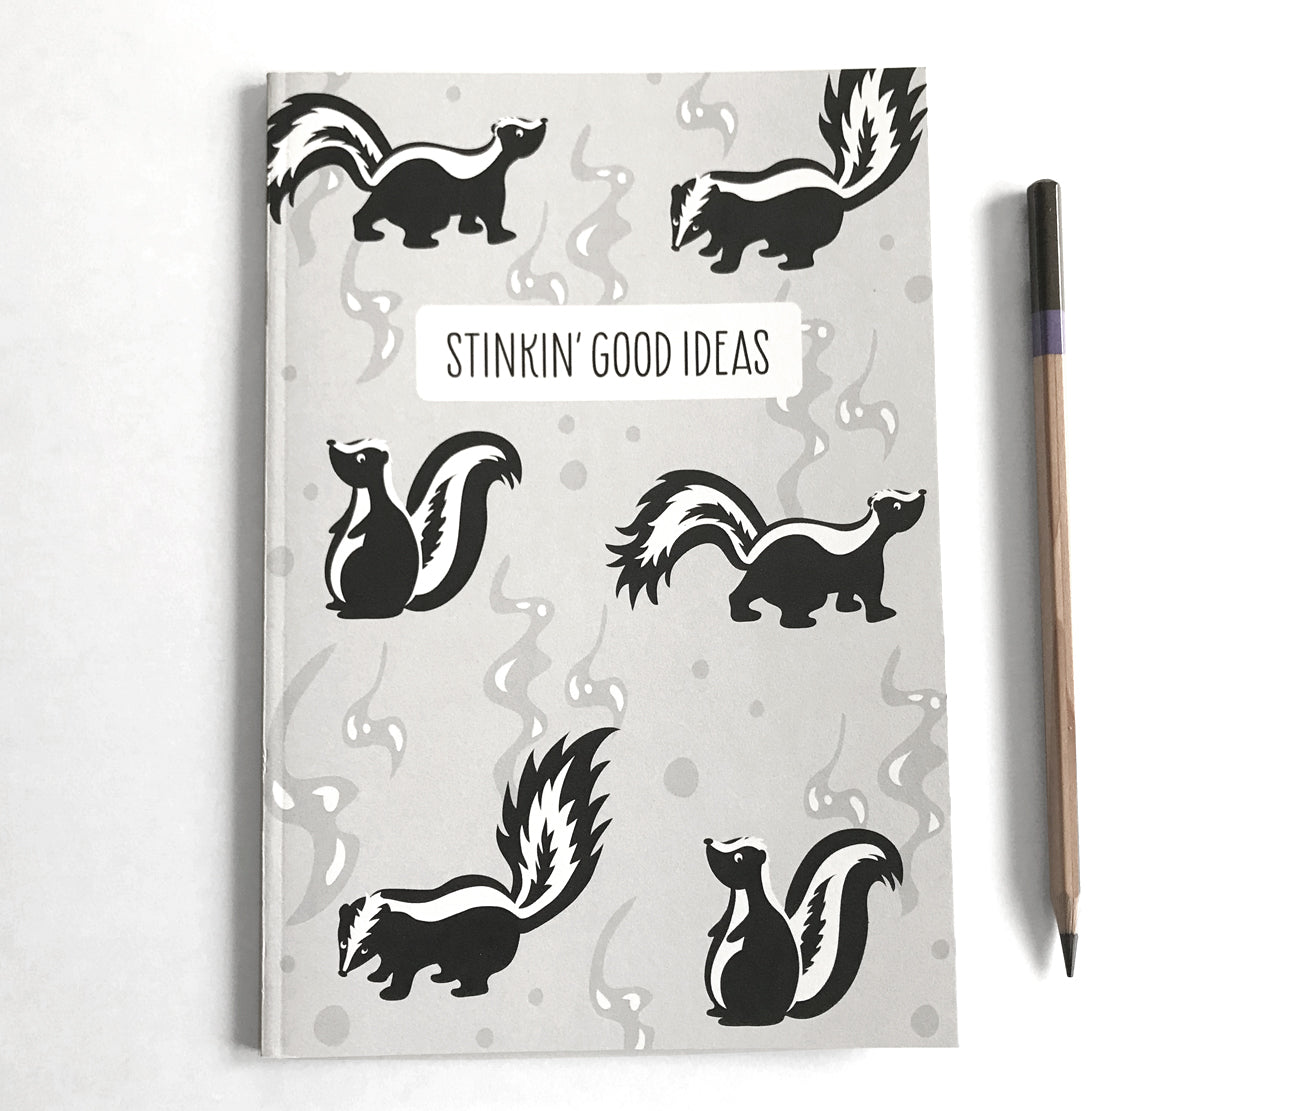 Skunk lined notebook by The Imagination Spot